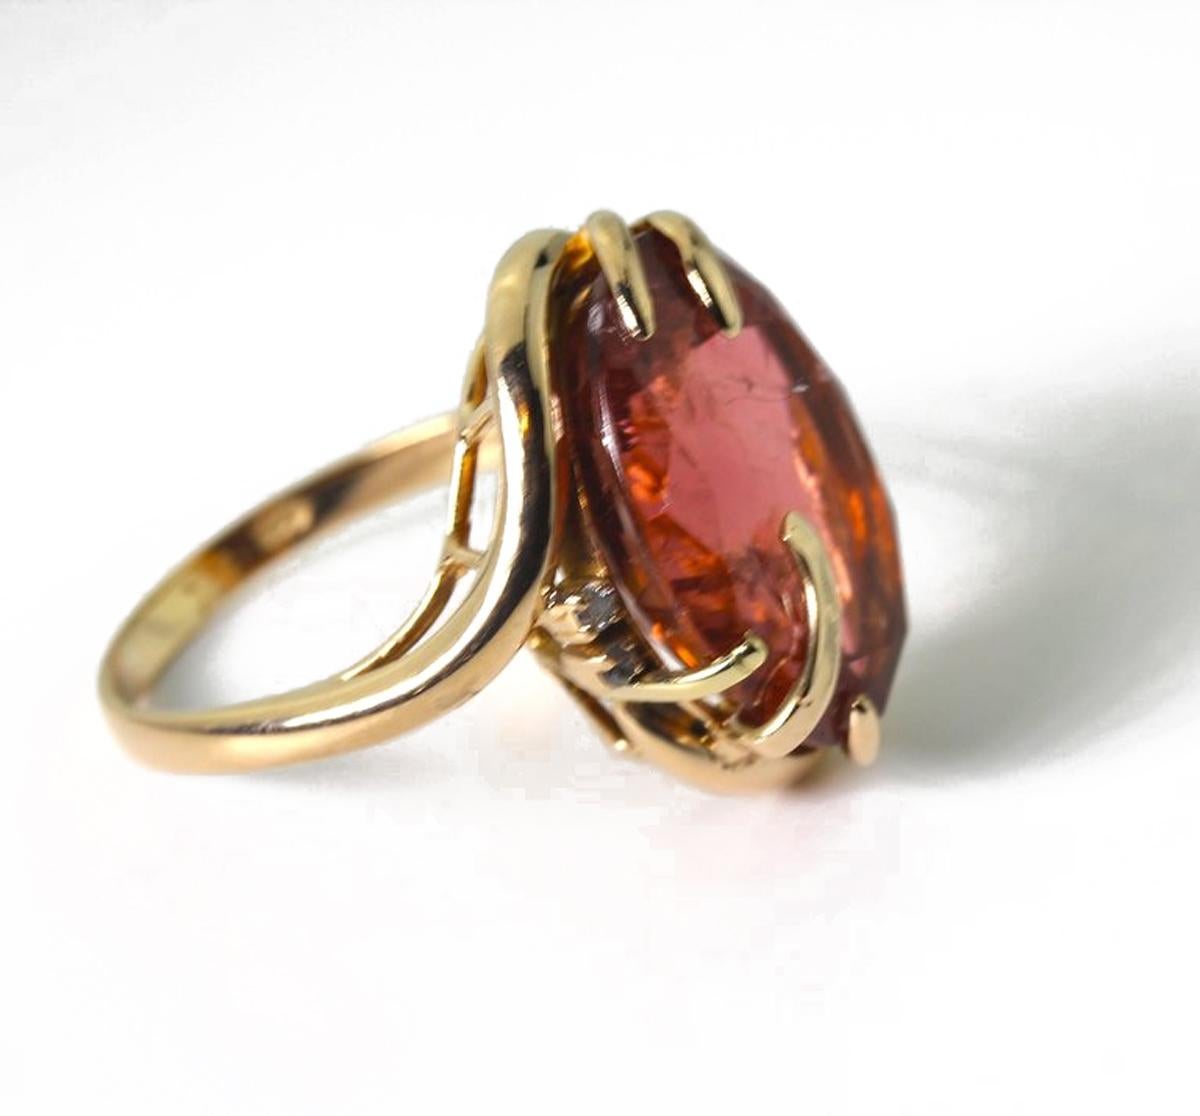 The glittering peachy red 13.82 carat Brasilian Tourmaline is enhanced with three teeny sparkling diamonds in a unique handmade 14Kt yellow gold ring size 7.  (sizable). The Tourmaline is 14mm x 18 mm.  More from this seller by putting gemjunky into